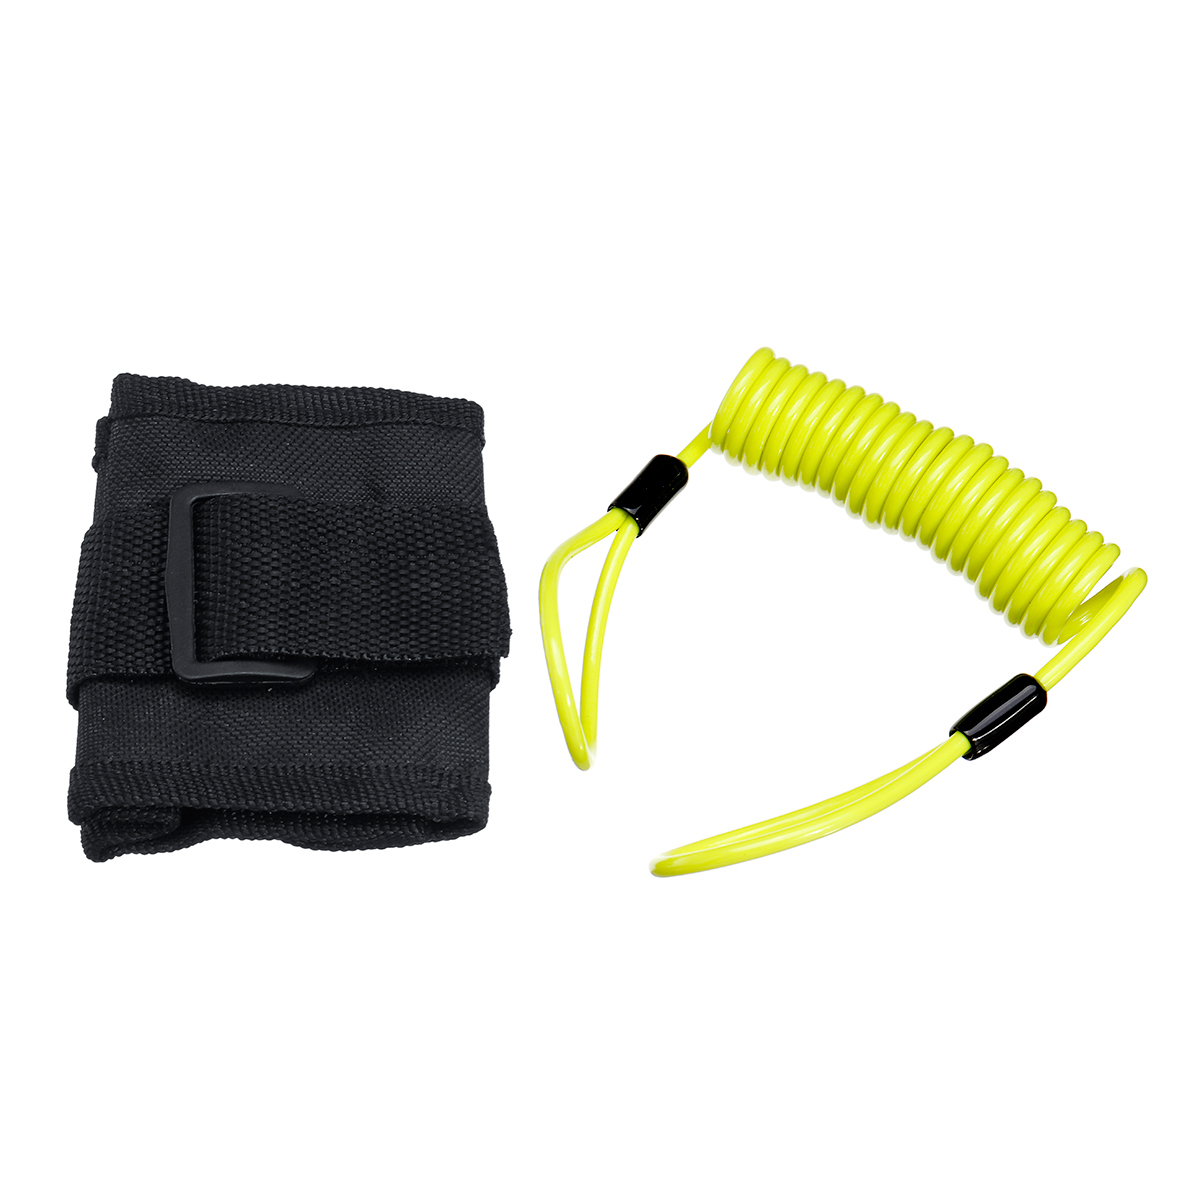 2M/6Ft Reminder Cable + Alarm Lock Bag for Motorcycle Bike Scooter